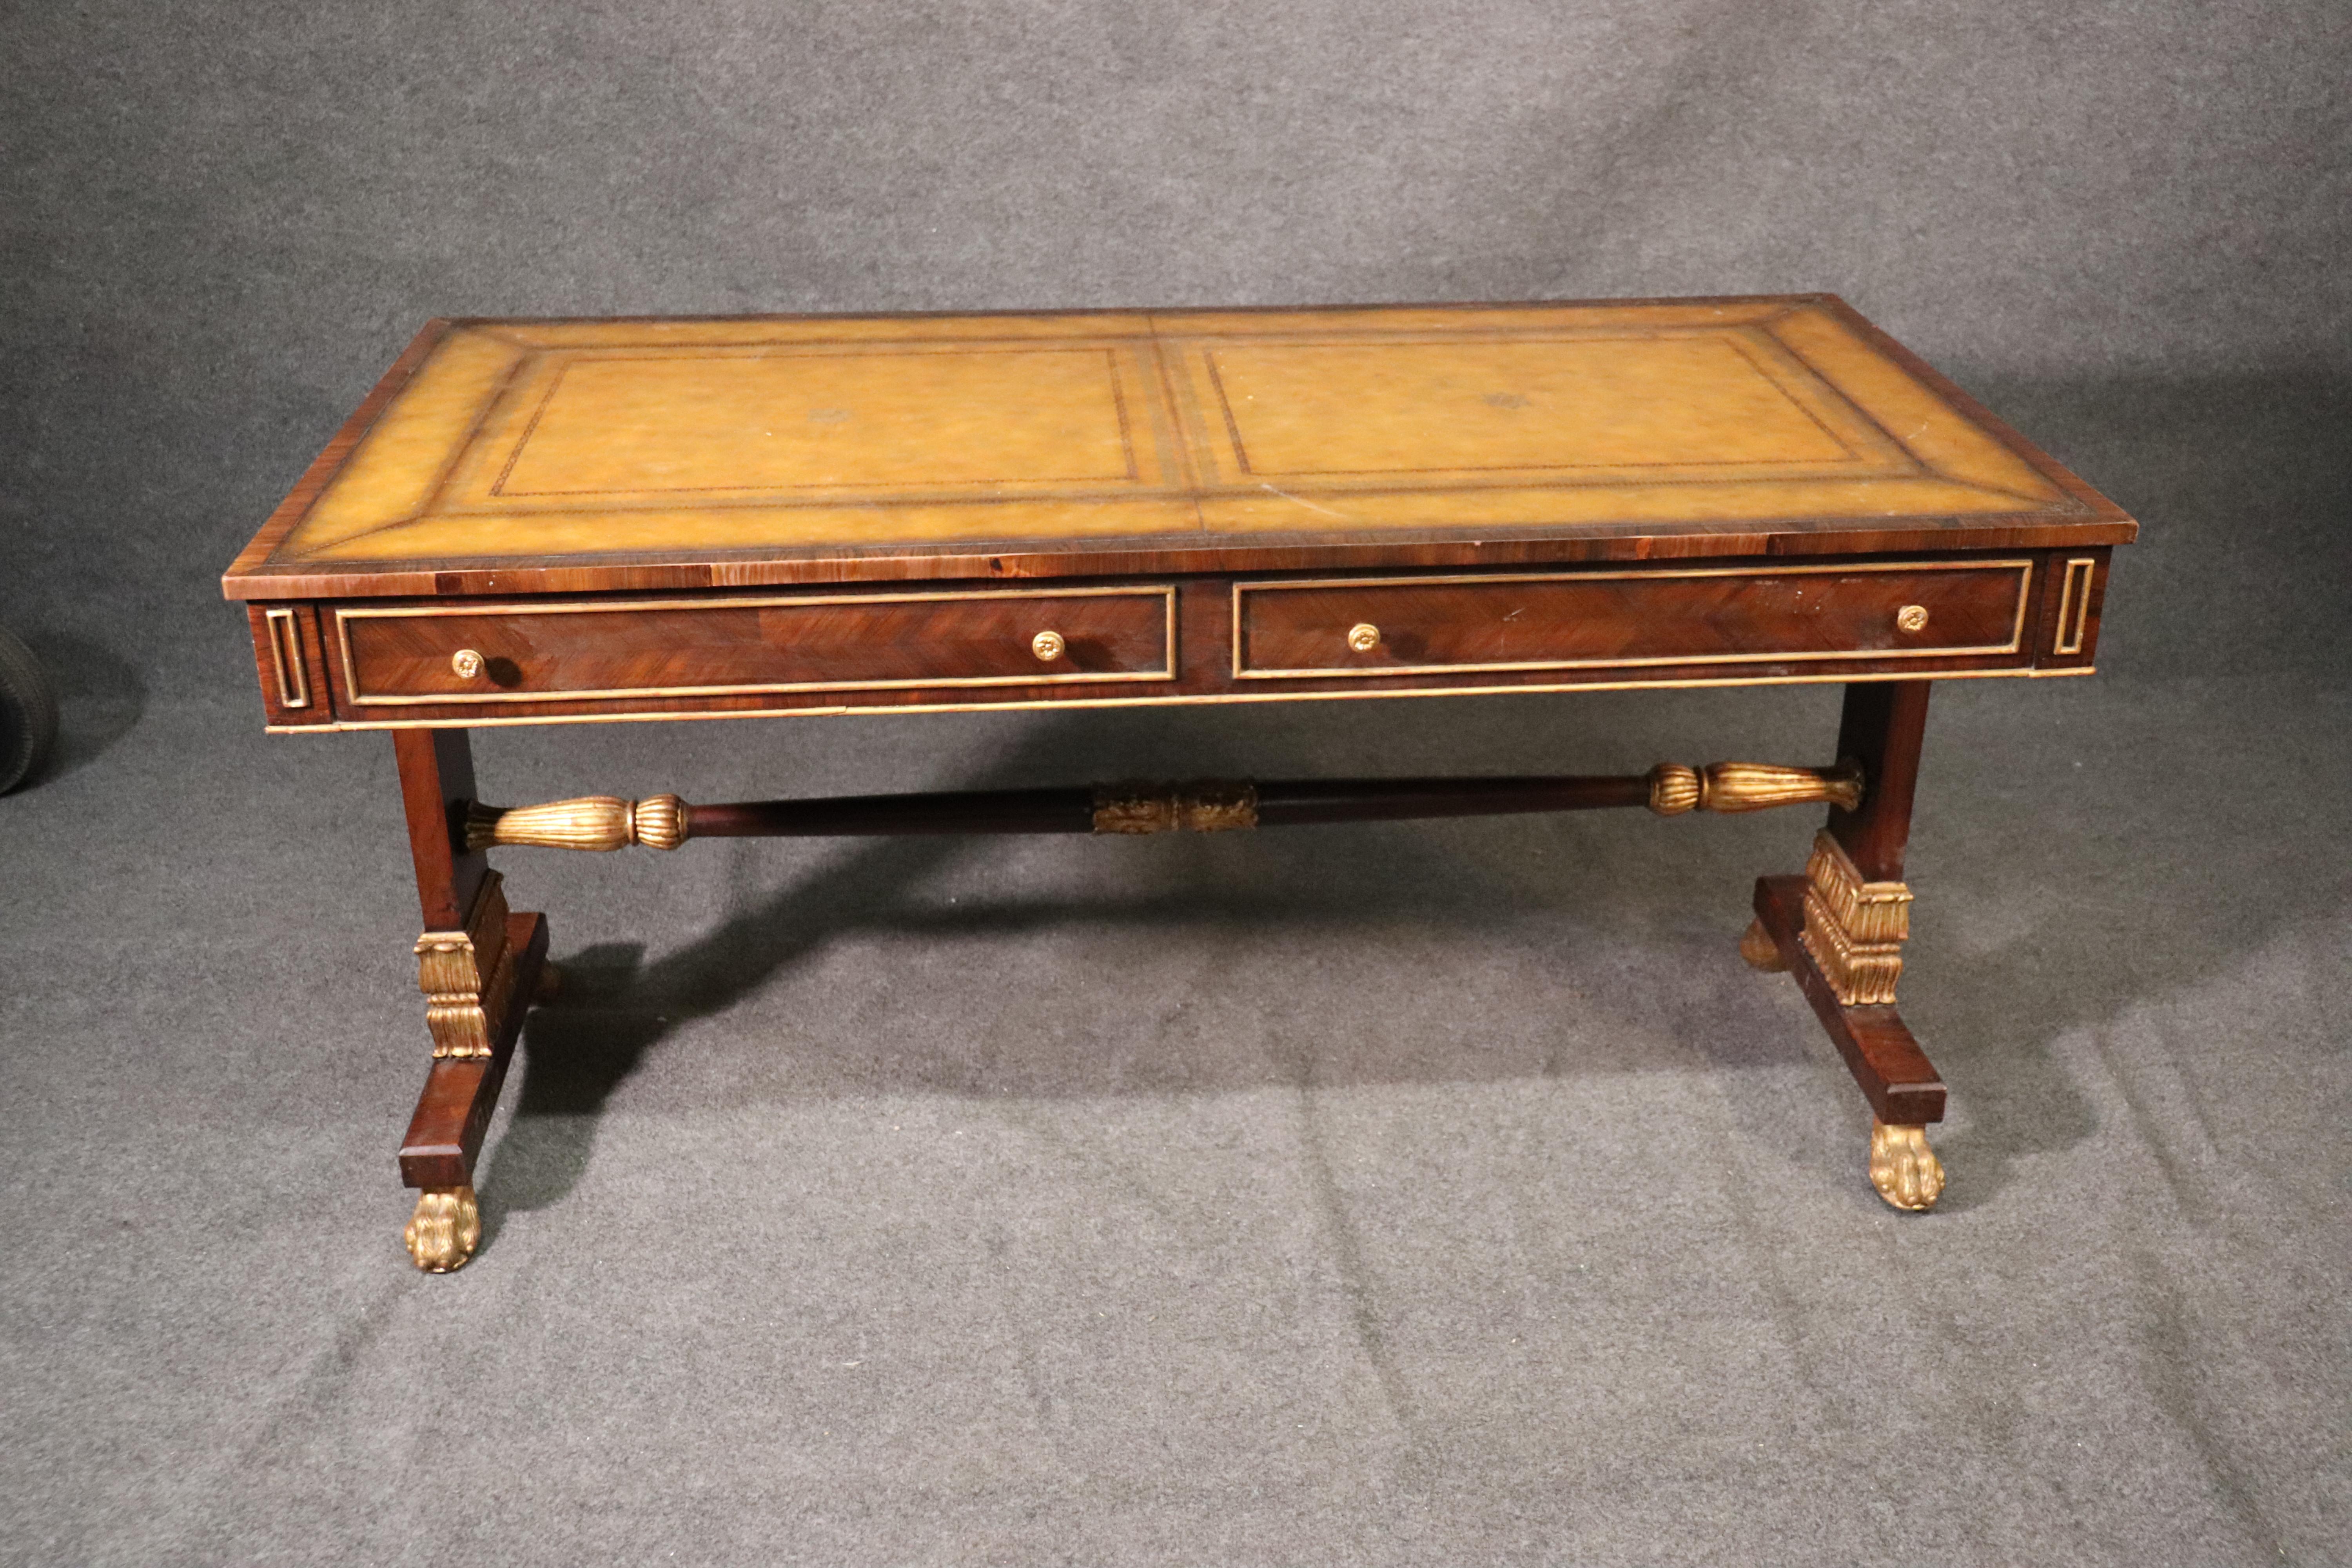 This is a gorgeous yellow ochre leather top desk designed in the manner of the best of English Regency and finished with genuine gold leaf details and a beautiful rosewood case. The desk is in good vintage used condition. The desk measures 60 wide x